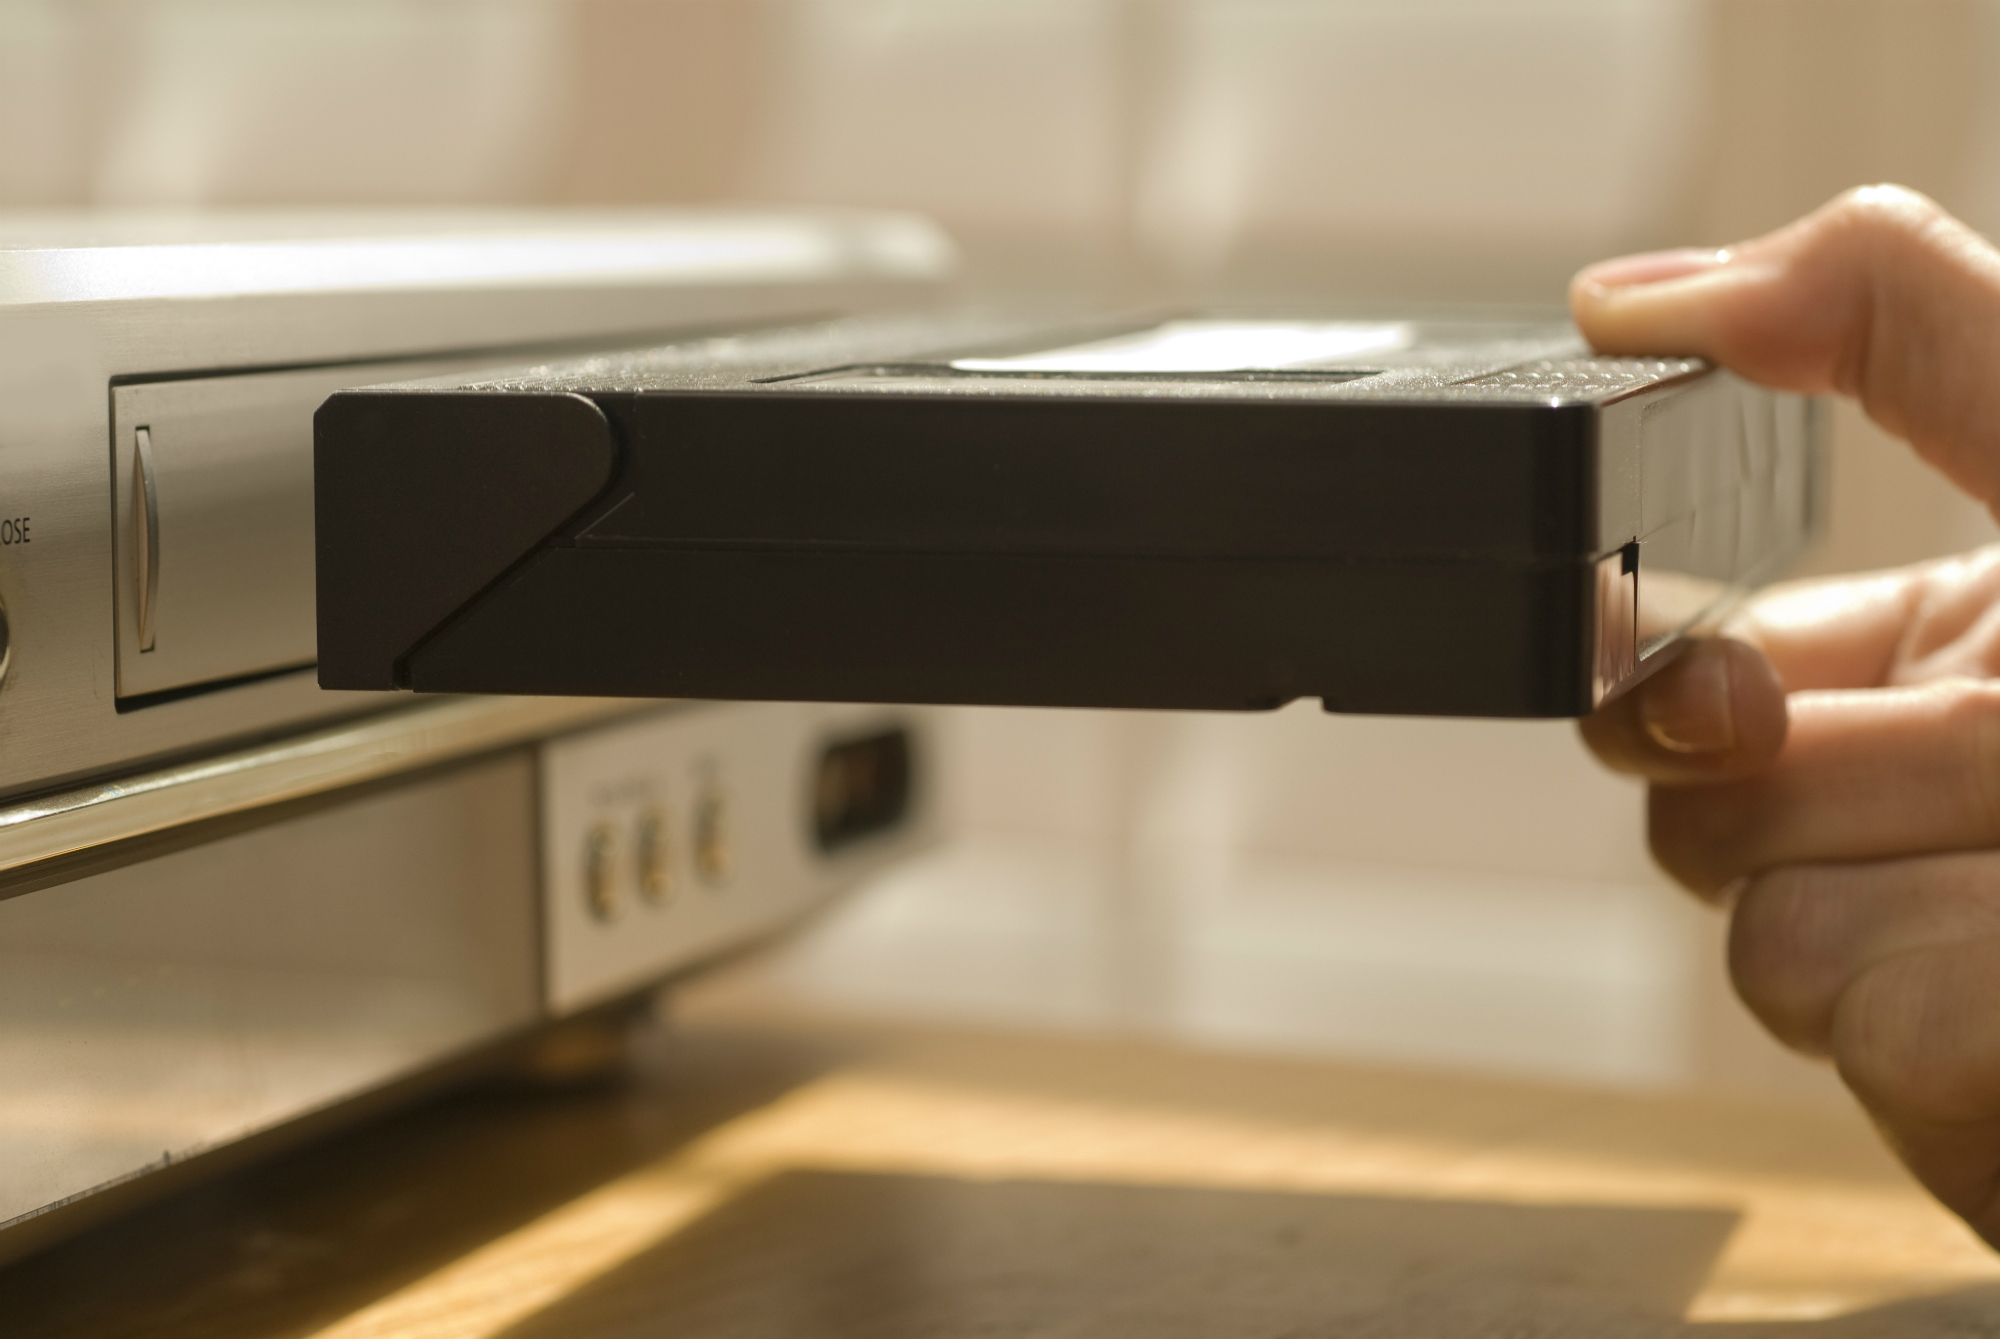 USB VCR Converter Lets You Transfer VHS To Less Ancient Gadgets